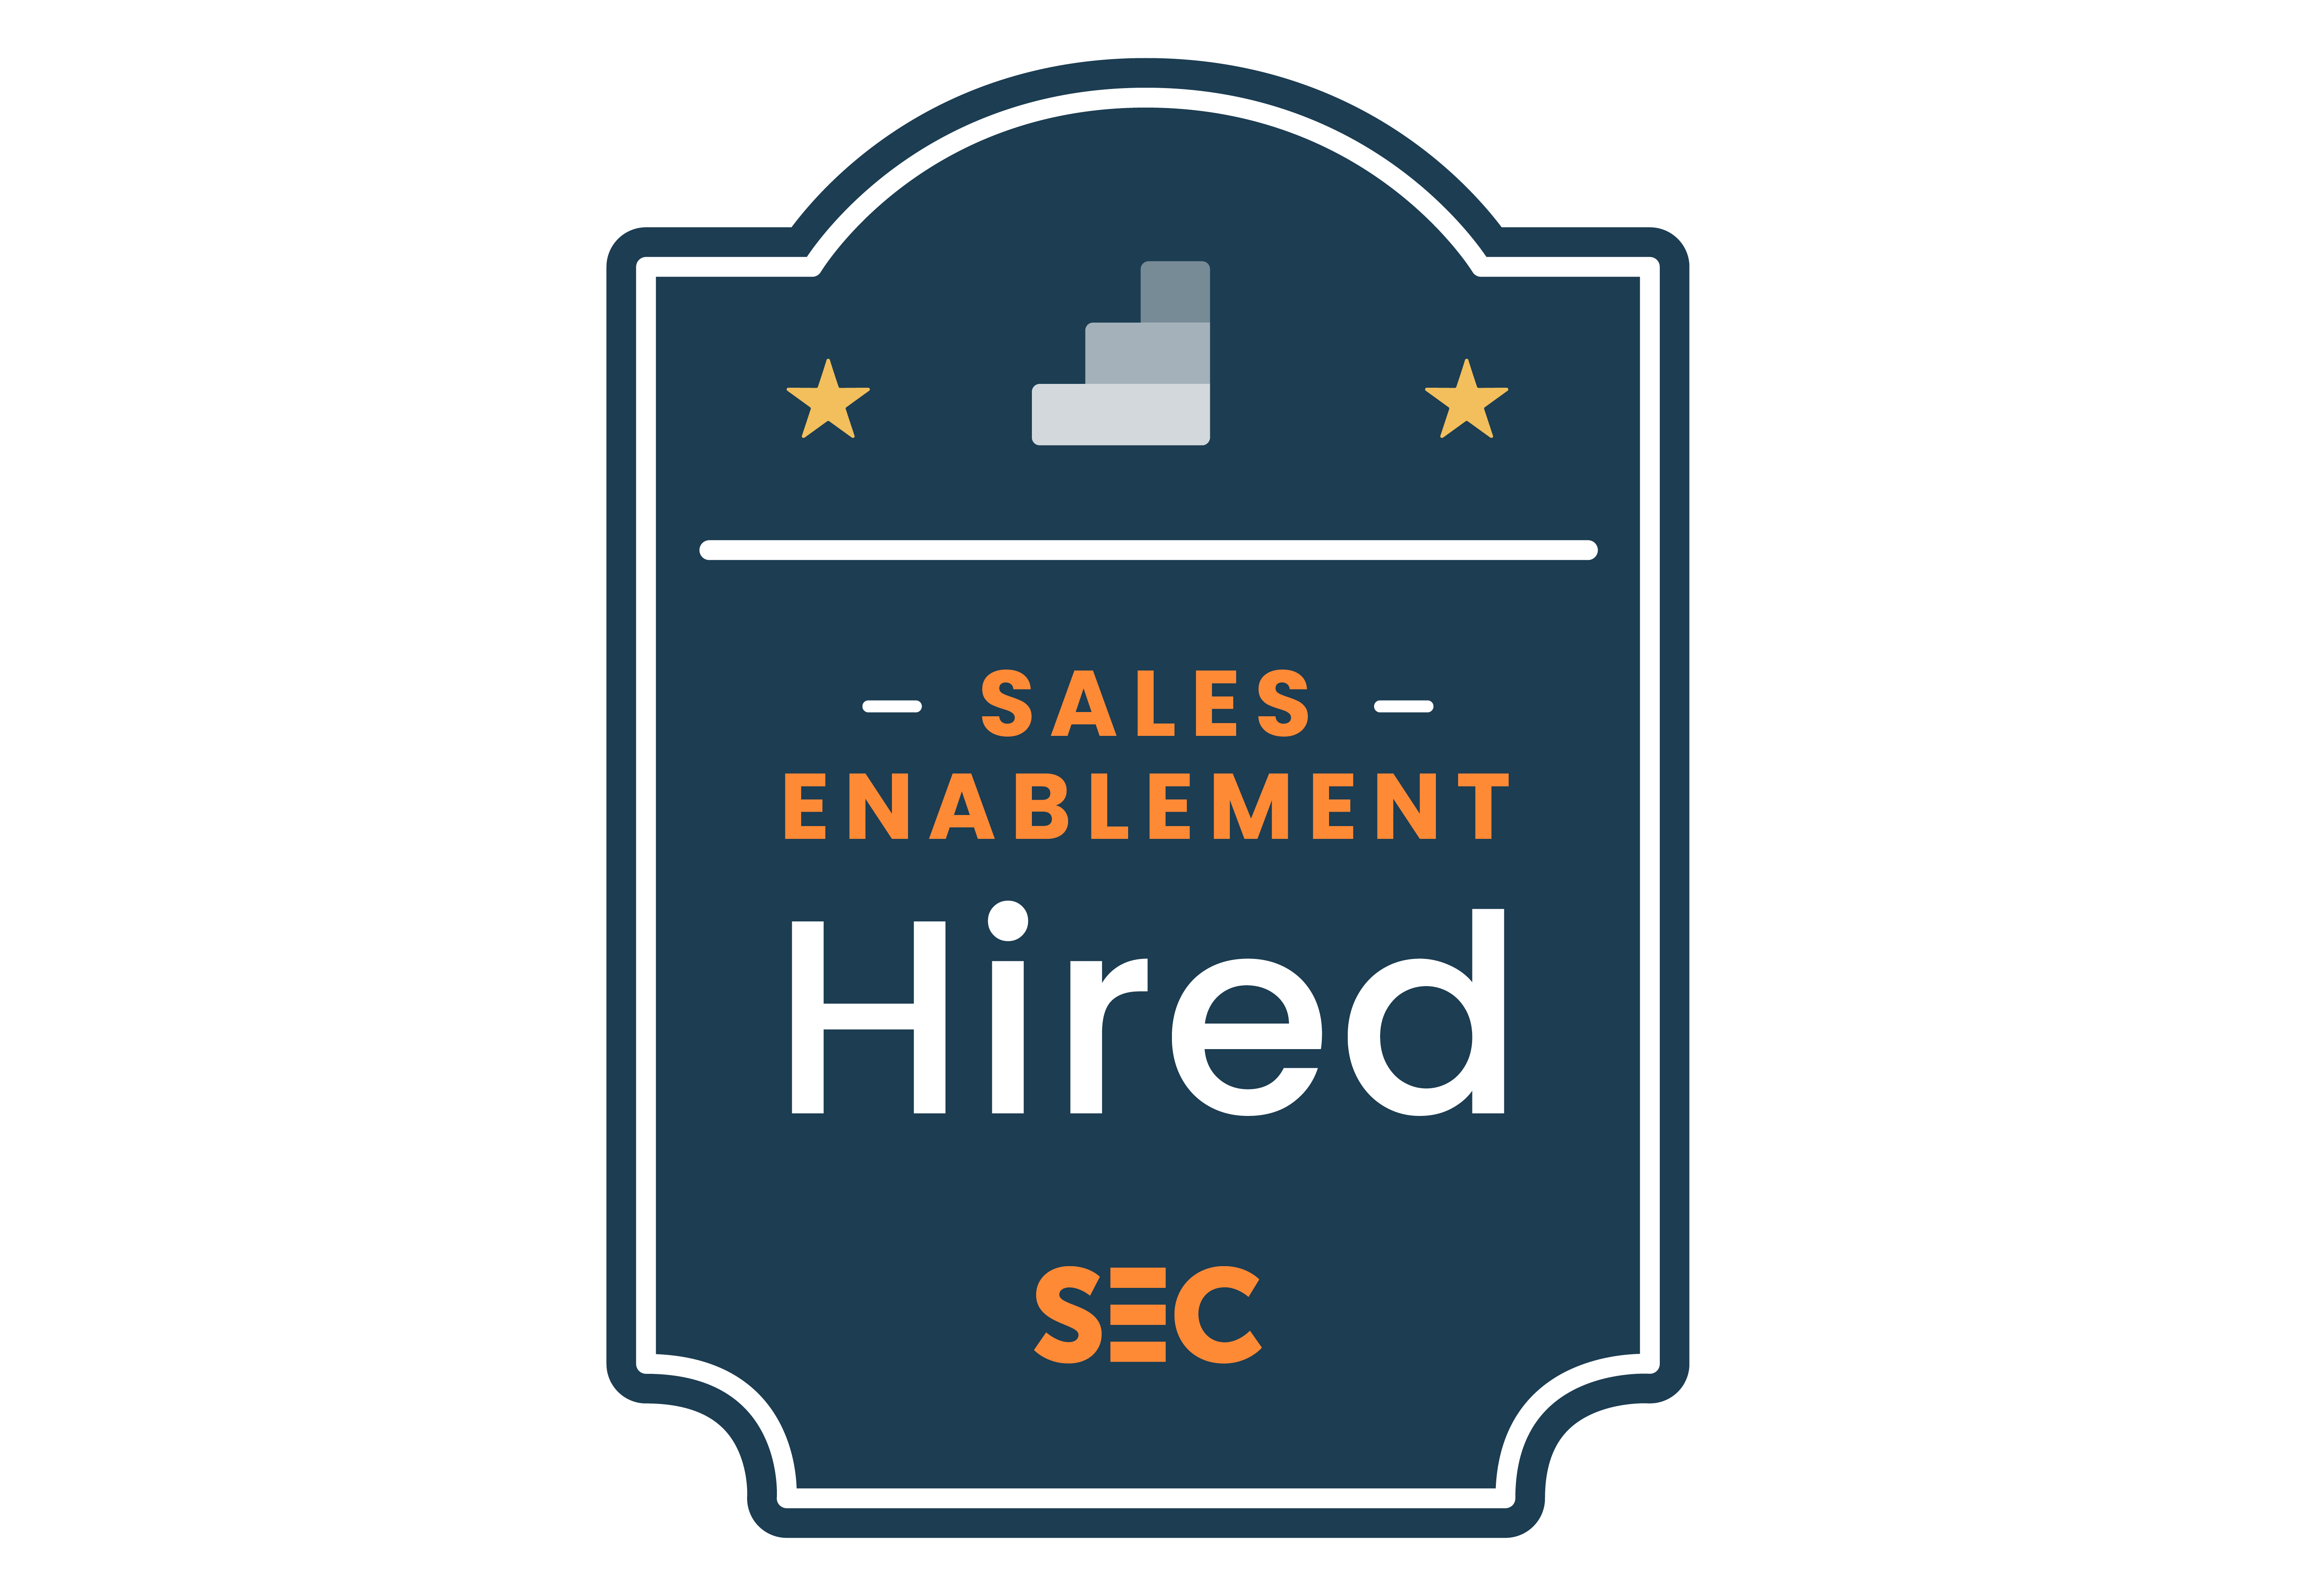 Sales Enablement Hired badge